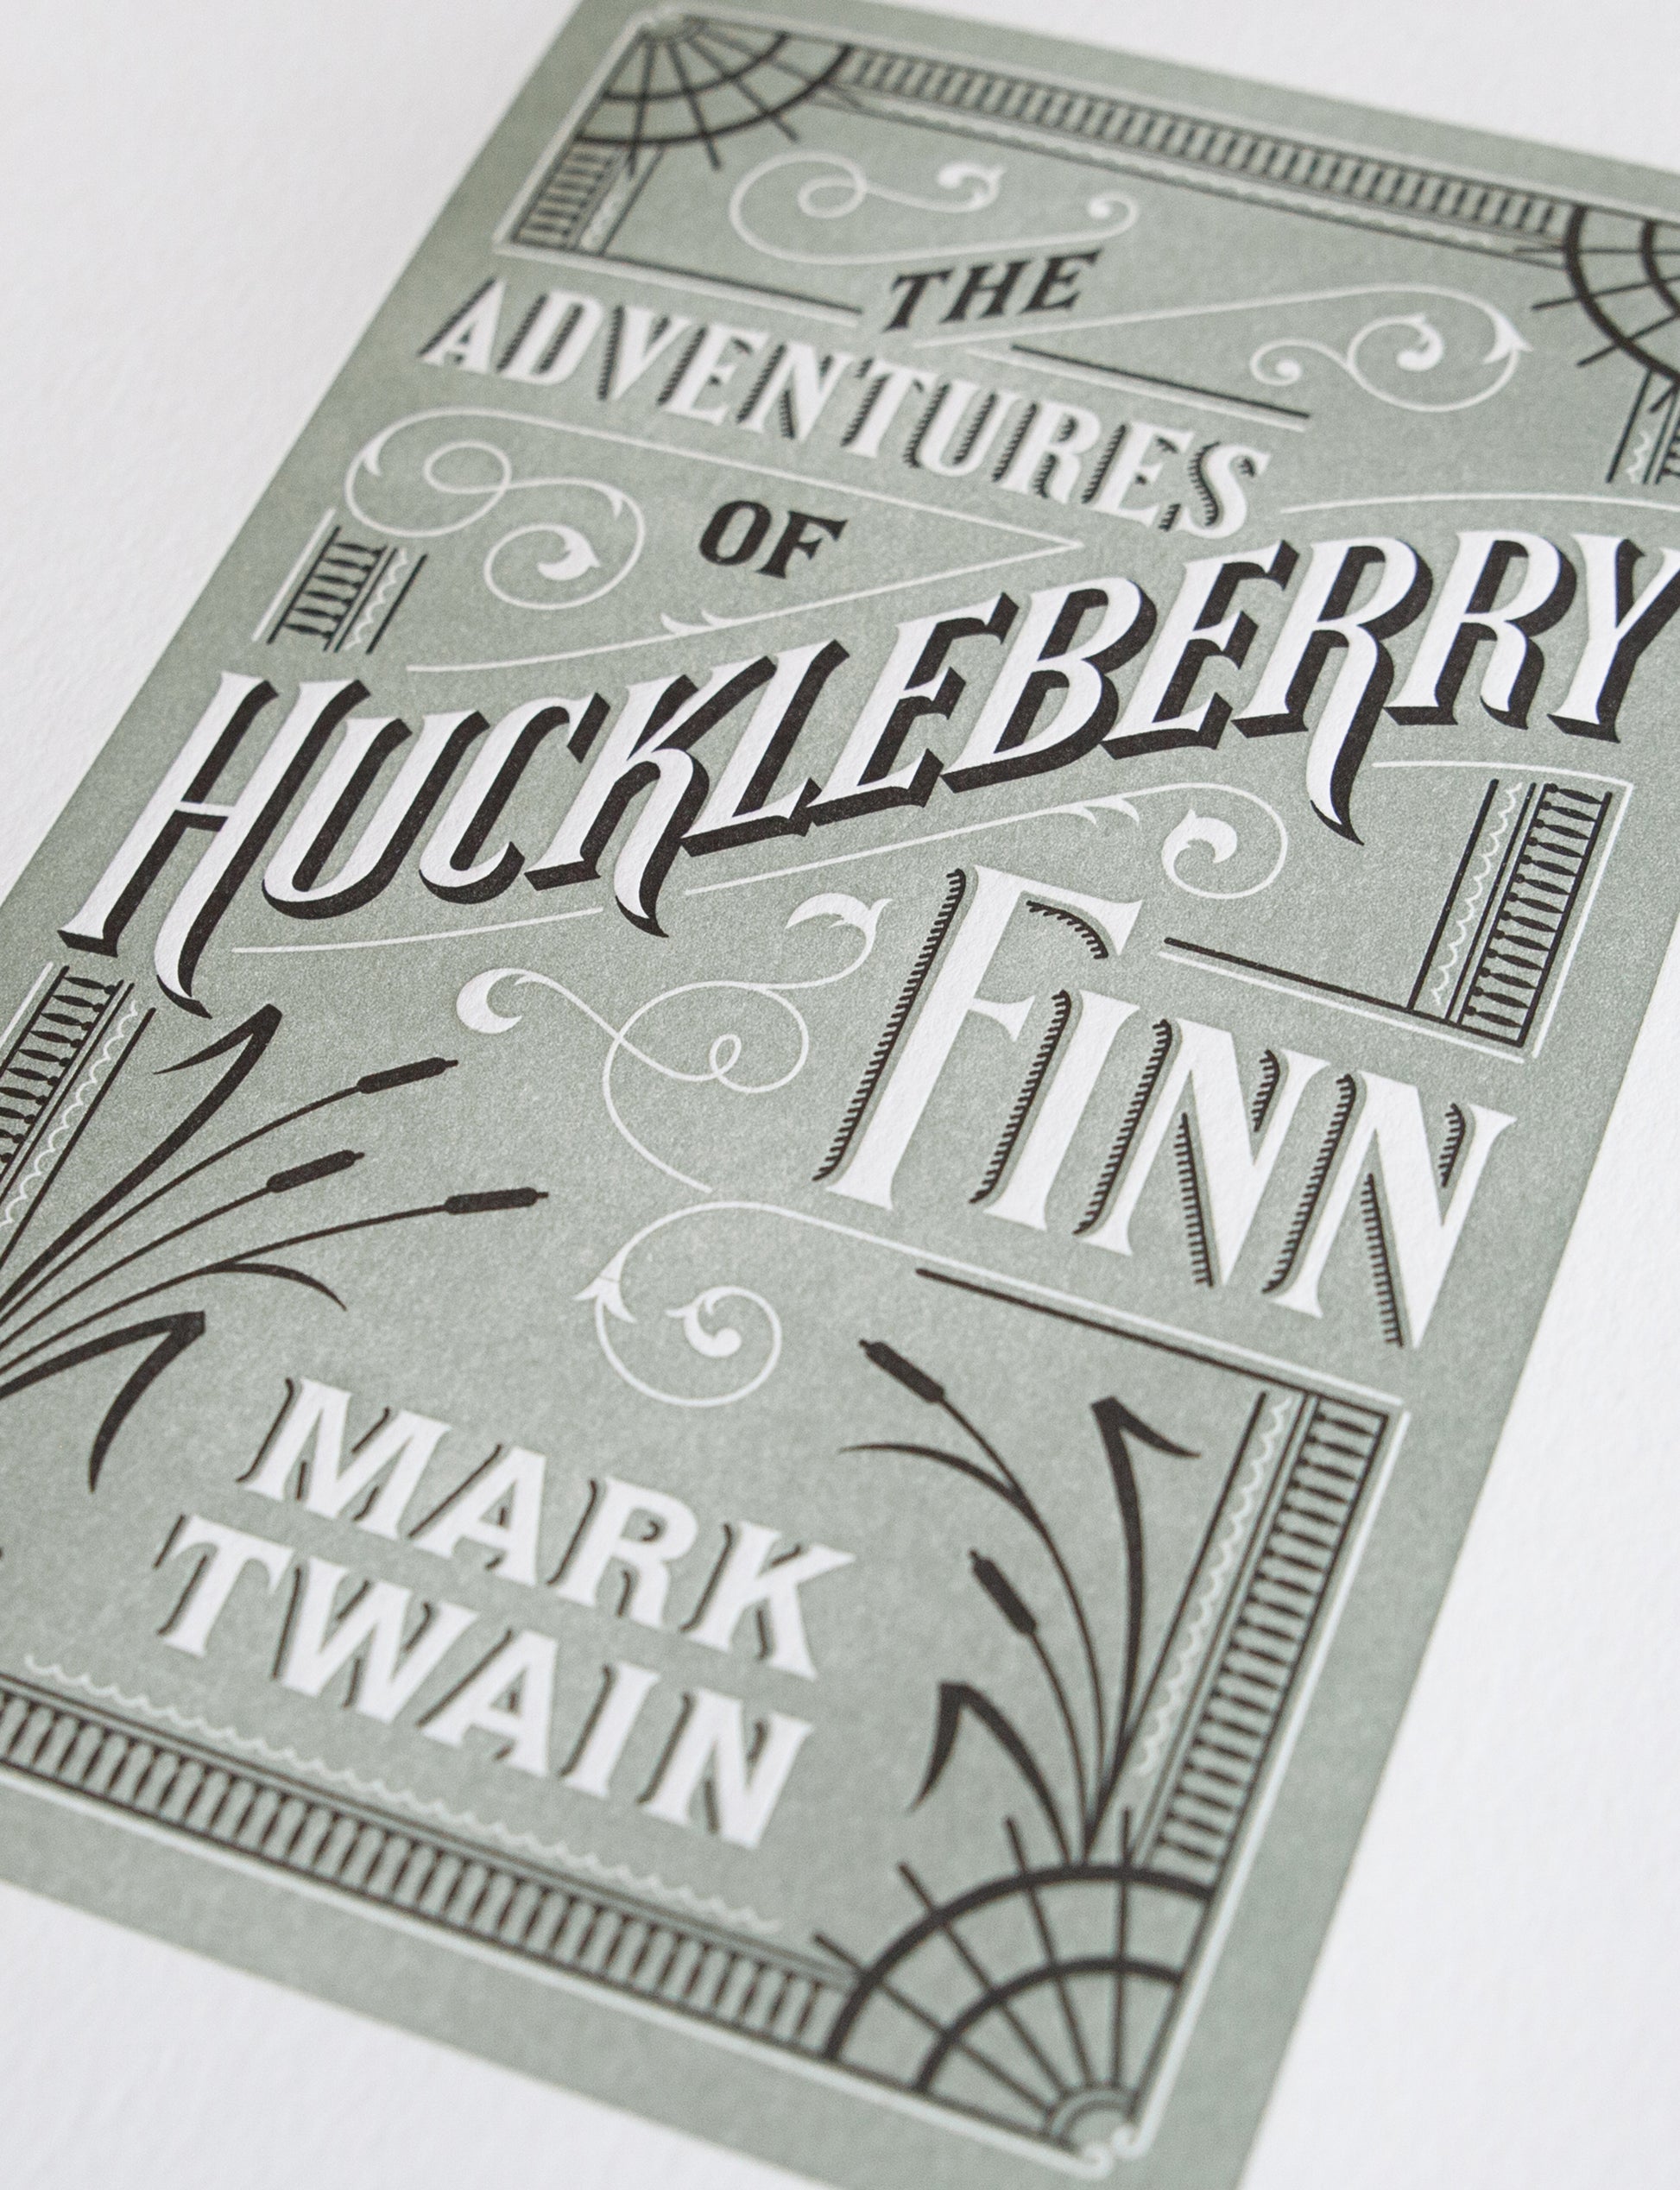 Close-up of a 2-color letterpress print in green and black. Printed artwork is an illustrated book cover of The Adventures of Huckleberry Finn including custom hand lettering.